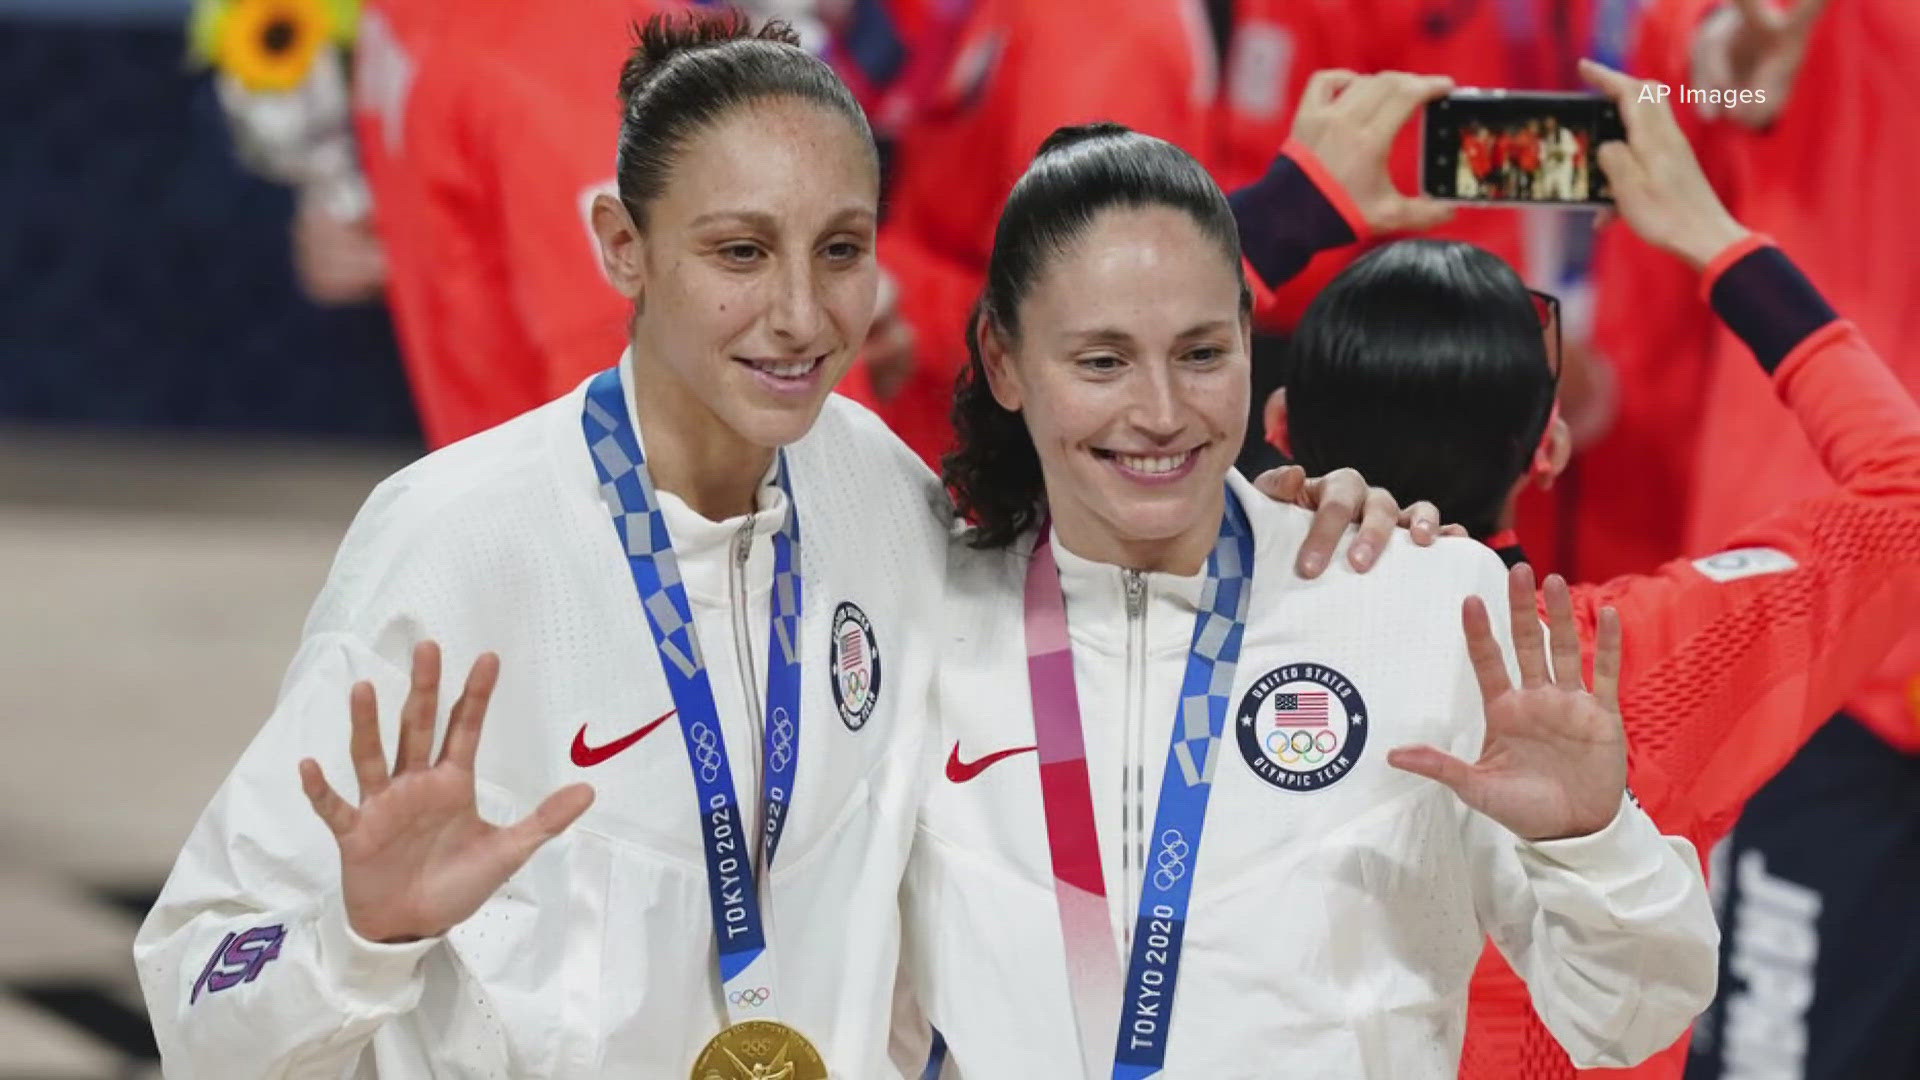 Kahleah Copper, who was named an Olympian for the first time in her nine-year professional career, will join Olympic veterans Diana Taurasi and Brittney Griner.